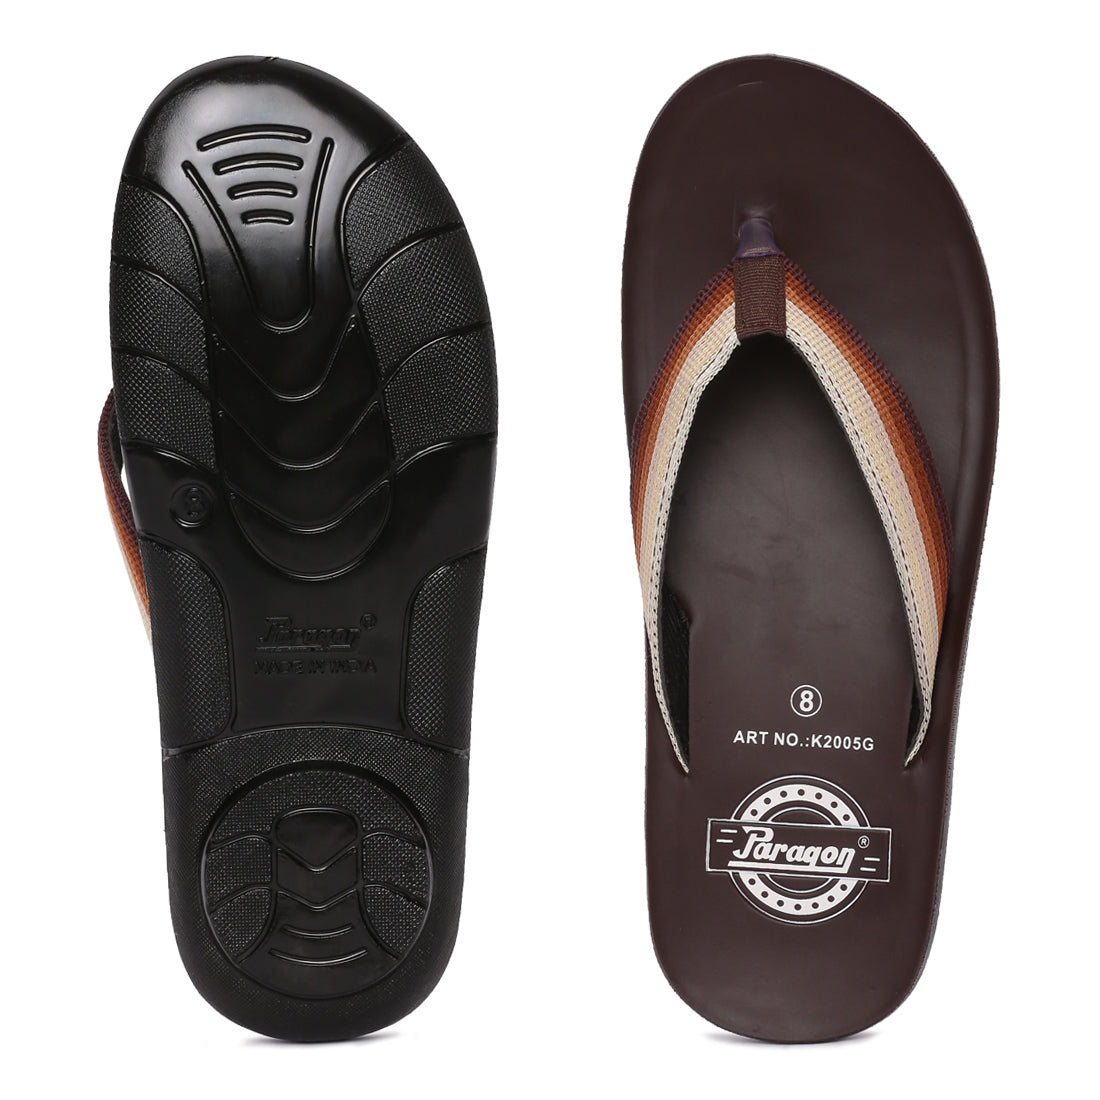 Paragon  K2005G Men Stylish Lightweight Flipflops | Casual &amp; Comfortable Daily-wear Slippers for Indoor &amp; Outdoor | For Everyday Use